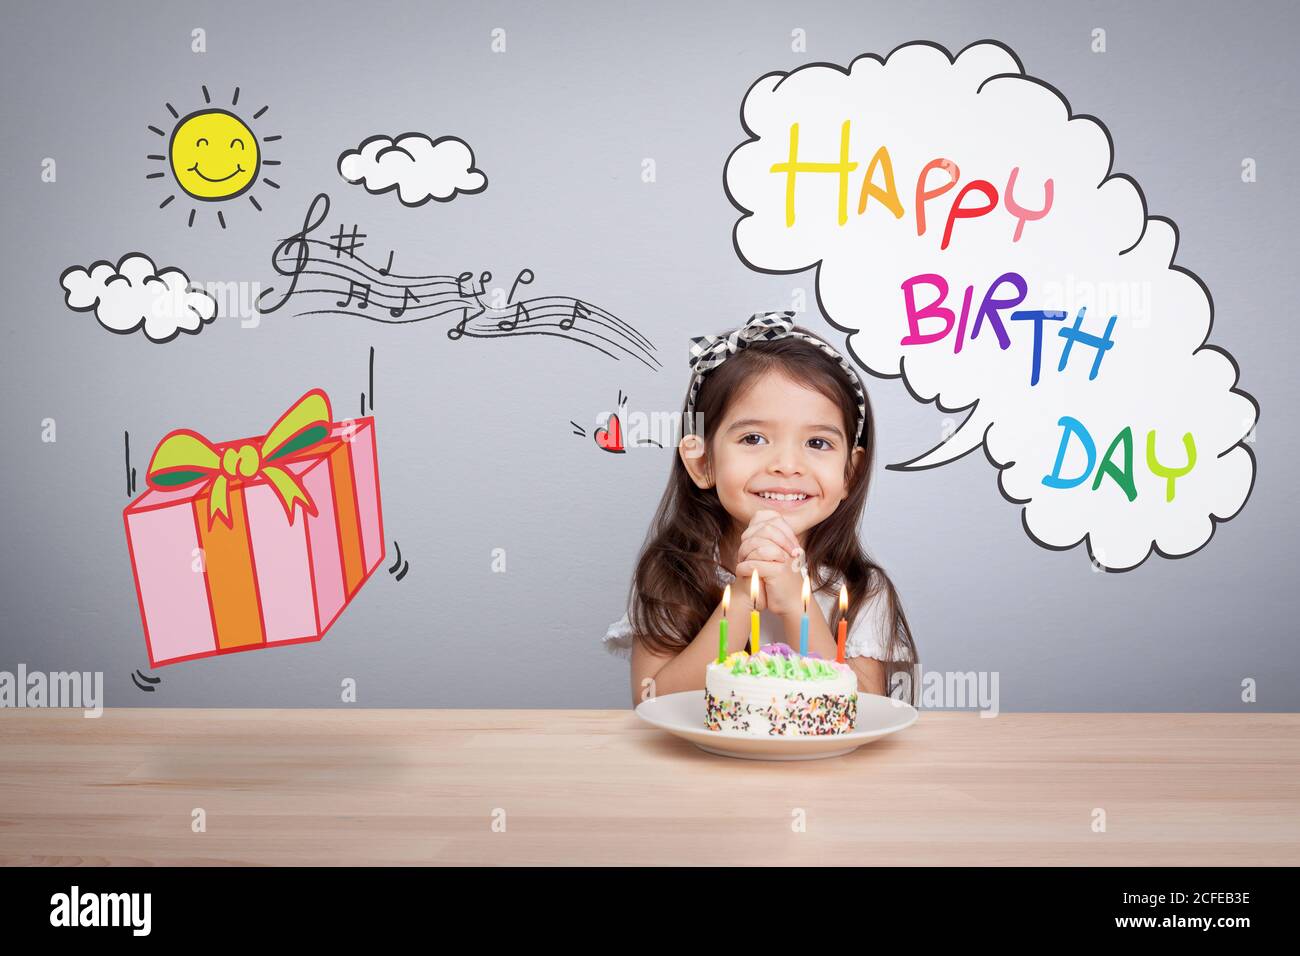 cute girl make a wish on birthday cake with candle. Happy Birthday background. Greeting background for card, flyer, poster, sign, banner, web Stock Photo